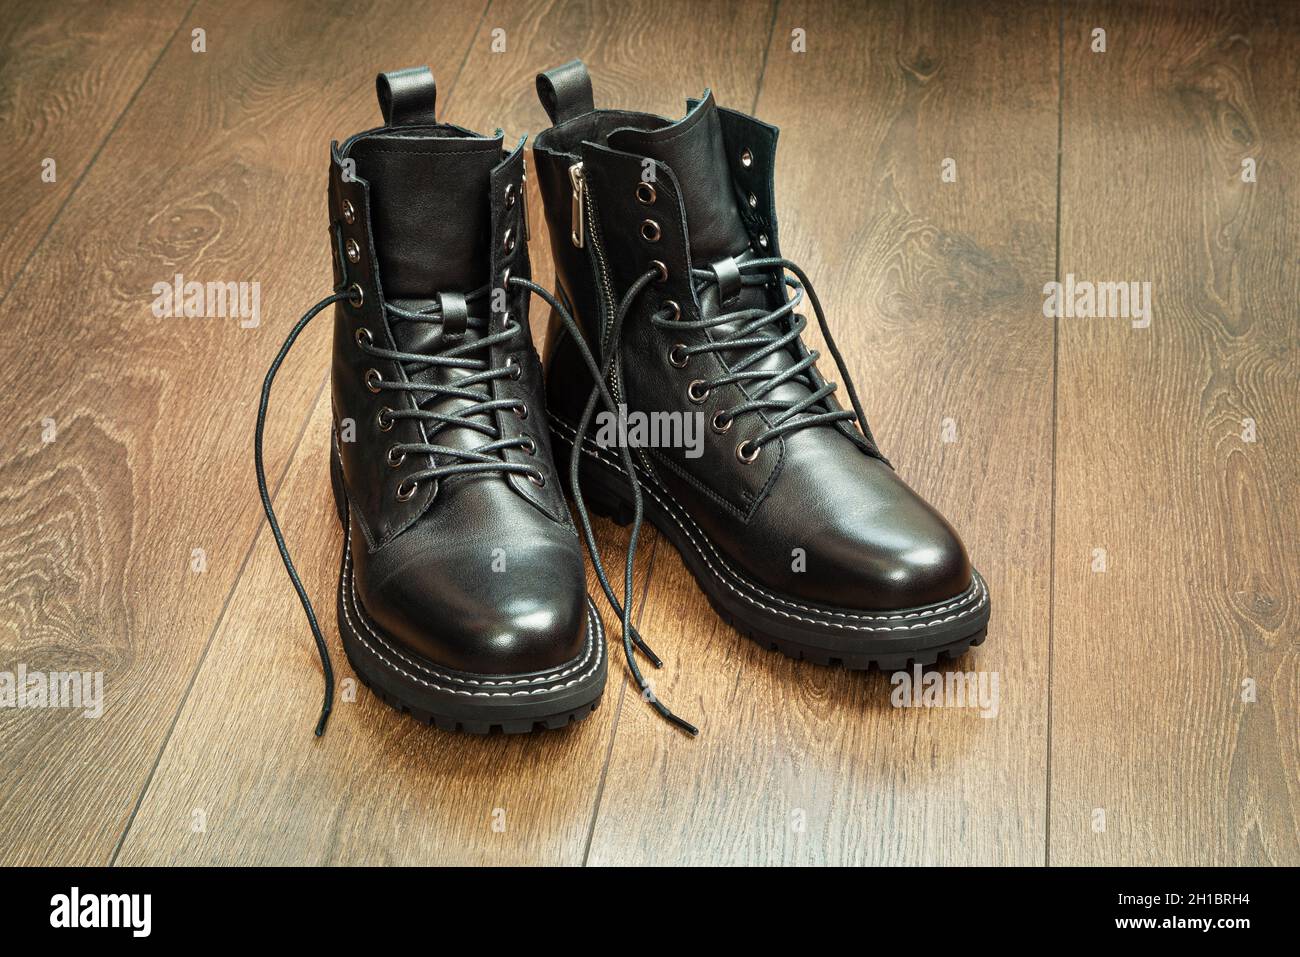 Men's shoes. Black boots on a wooden background. Close up Stock Photo